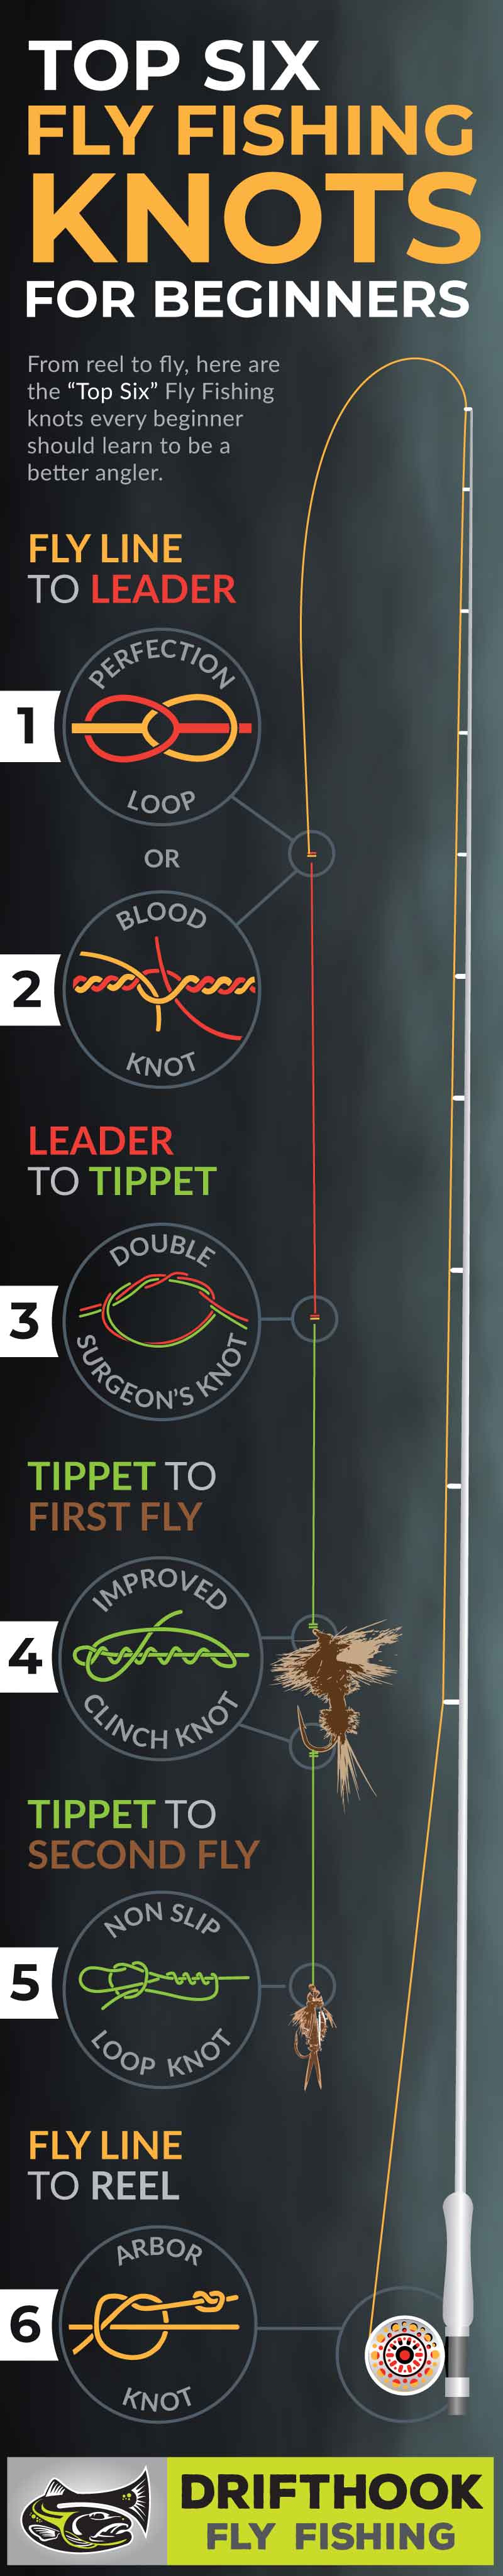 Top Six Fly Fishing Knots for Beginners